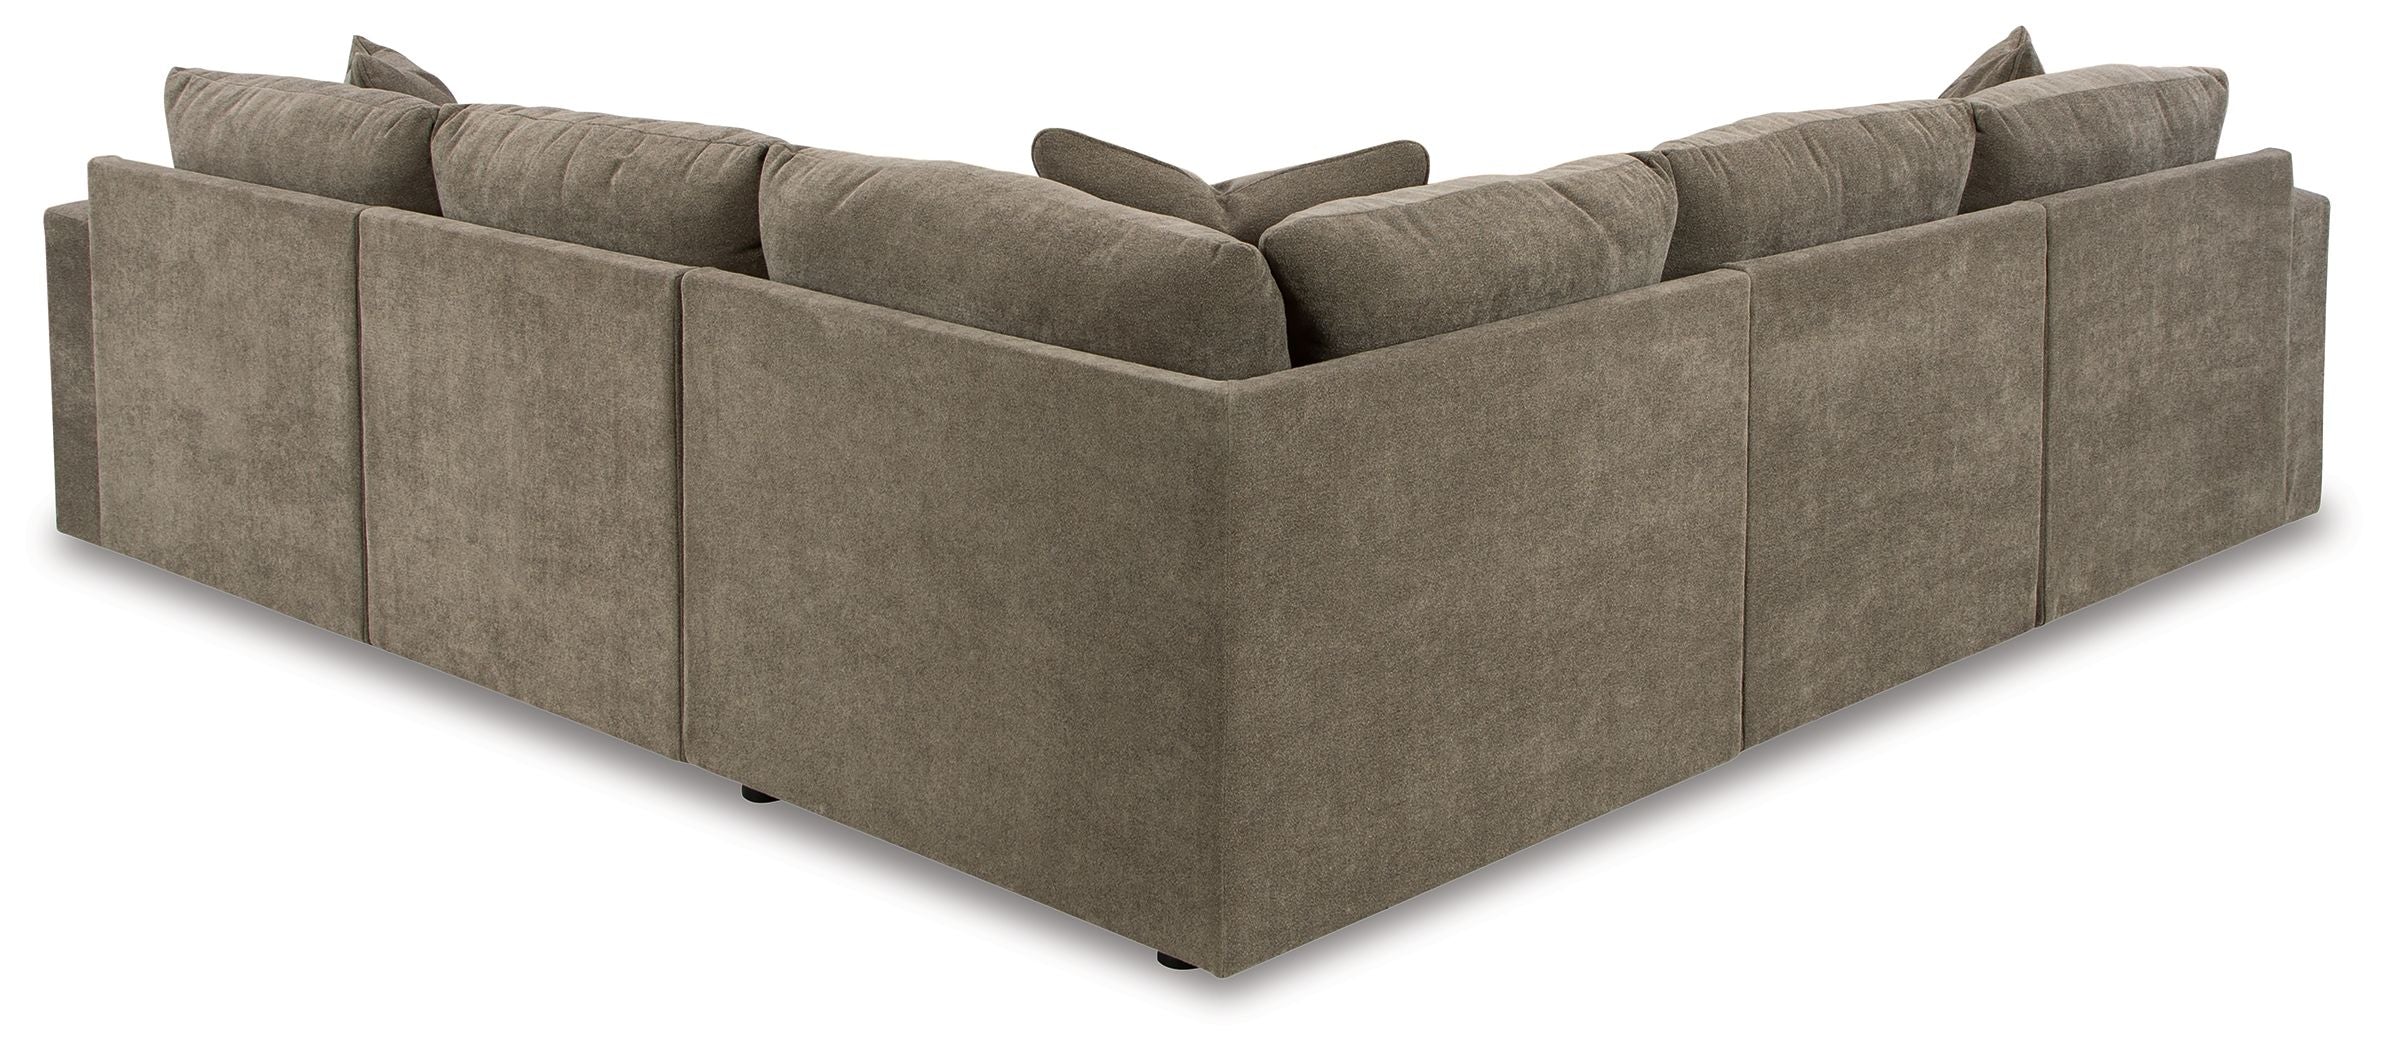 Signature Design by Ashley Raeanna Gray Sectional -Plush Cushions-Stationary Sectionals-American Furniture Outlet